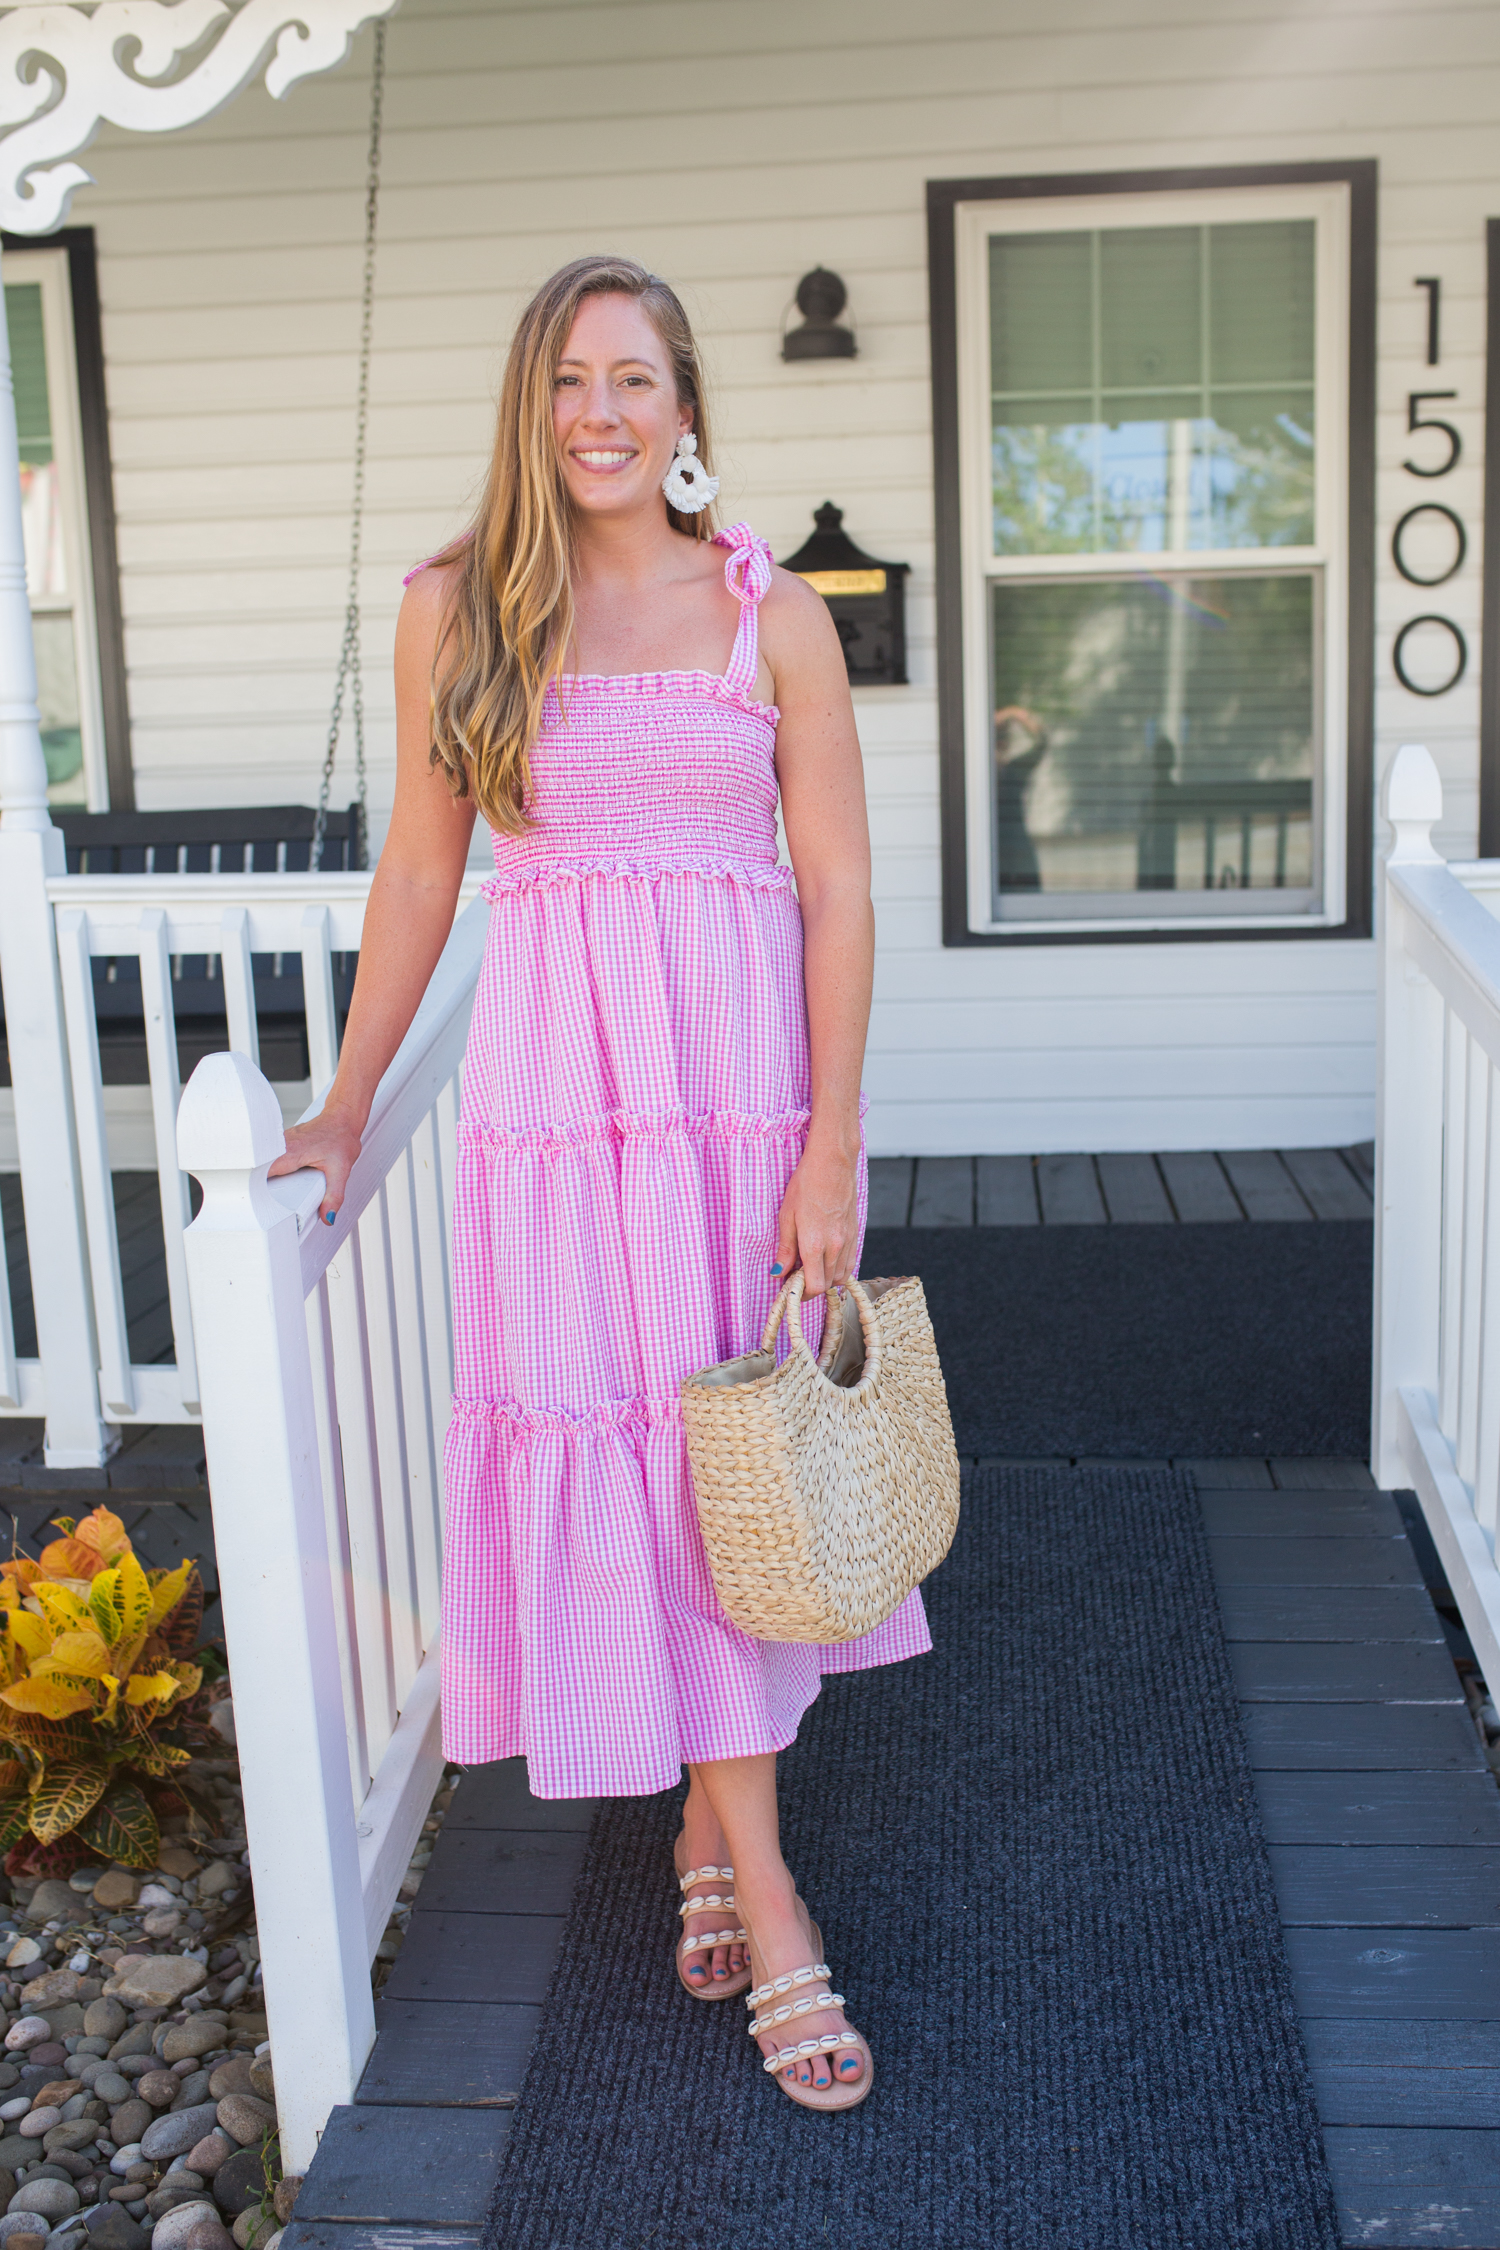 Gingham Tie Strap Midi Dress / Summer Dress Outfits / Preppy Style / Preppy Outfit / TIe Strap Dress / Casual Summer Dresses / Cute Dresses for Summer - Sunshine Style, A Preppy Fashion and Coastal Lifestyle Blog By Katie